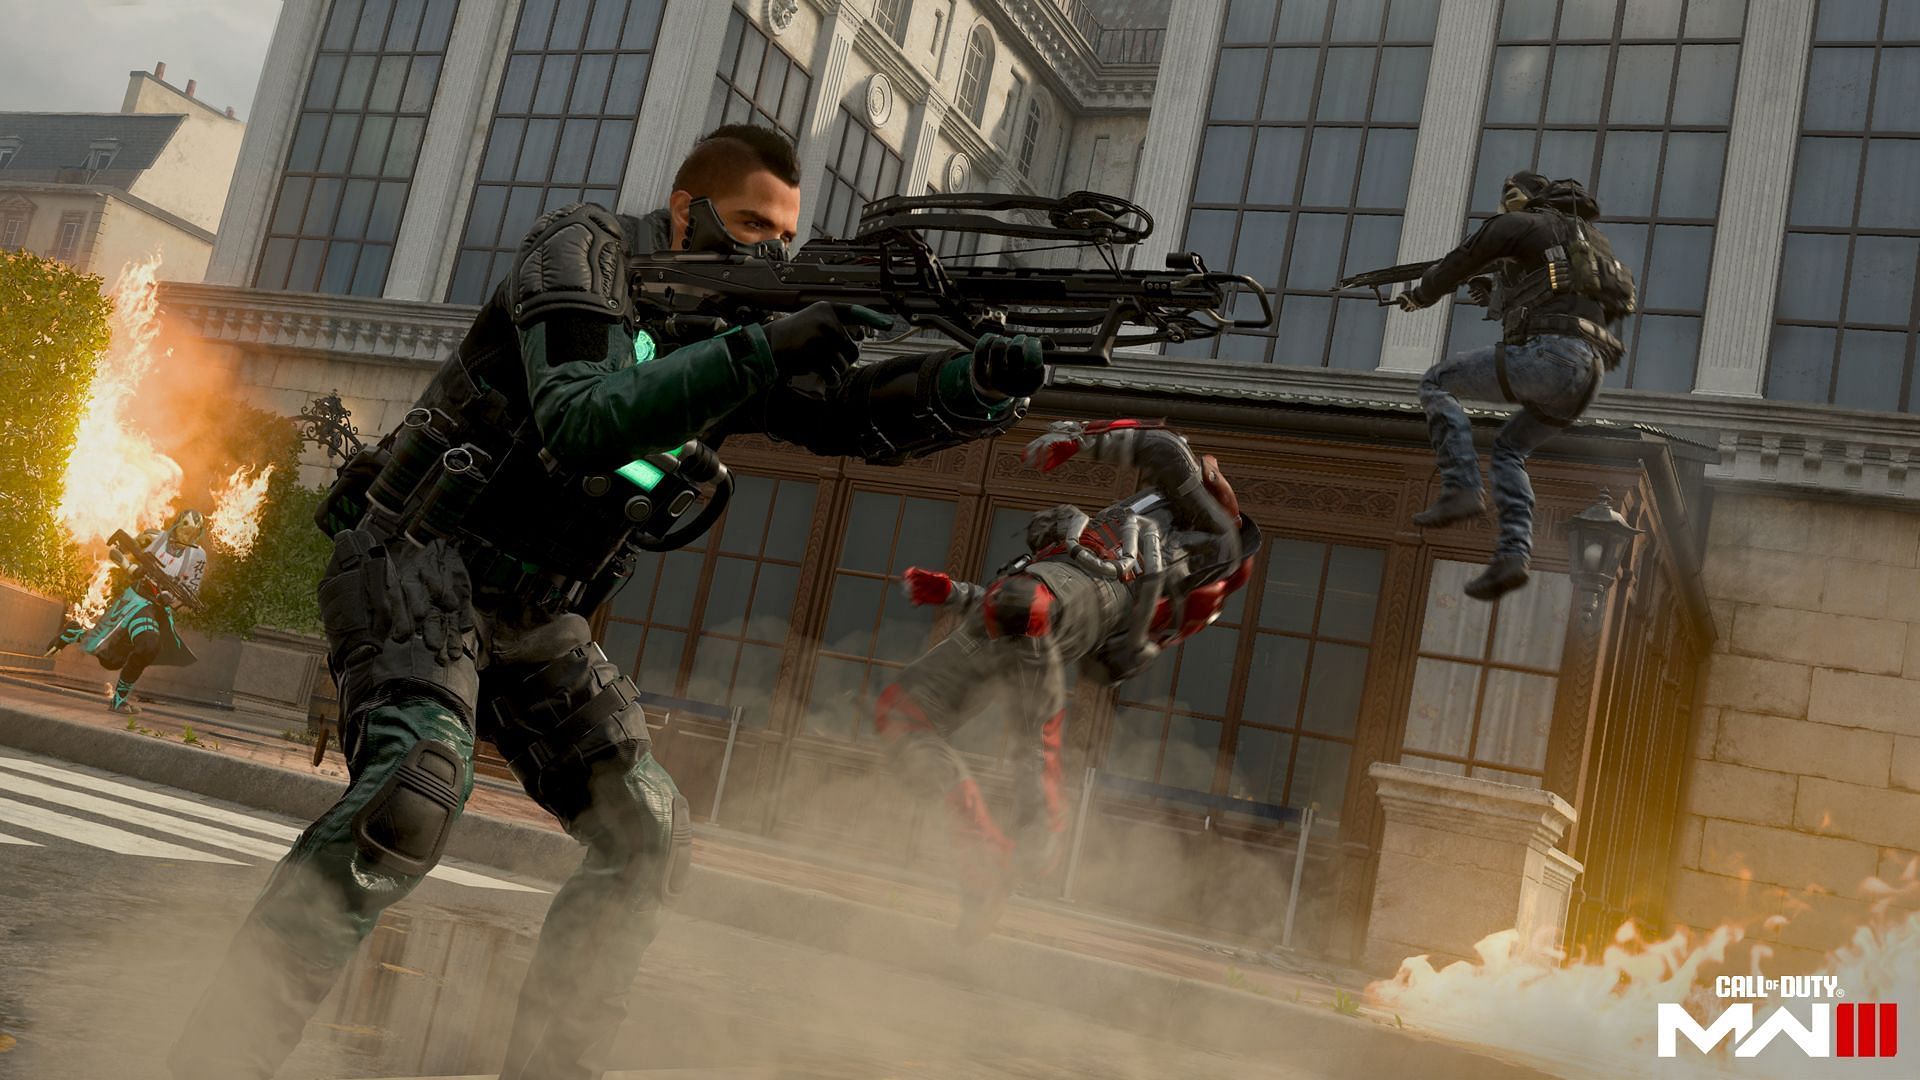 All weapon and Killstreak changes in Modern Warfare 3 Season 4 Reloaded explored (Image via Activision)